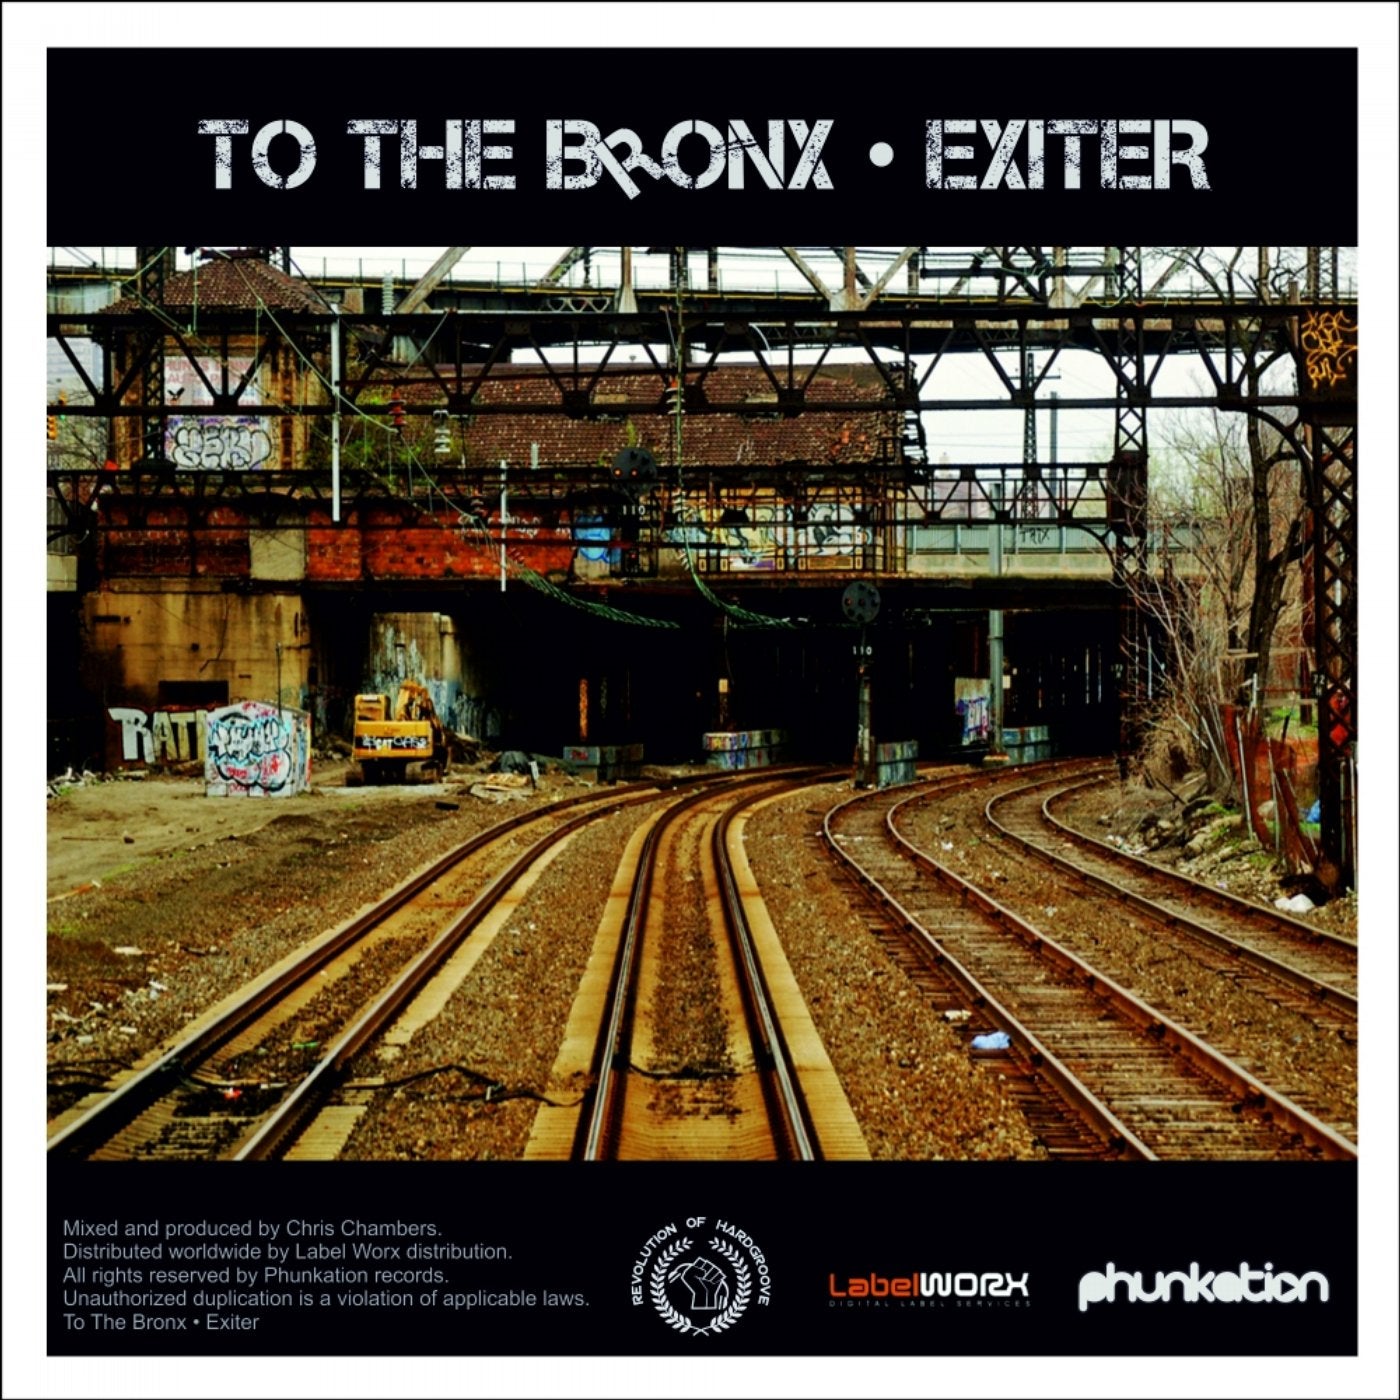 To The Bronx, Exiter